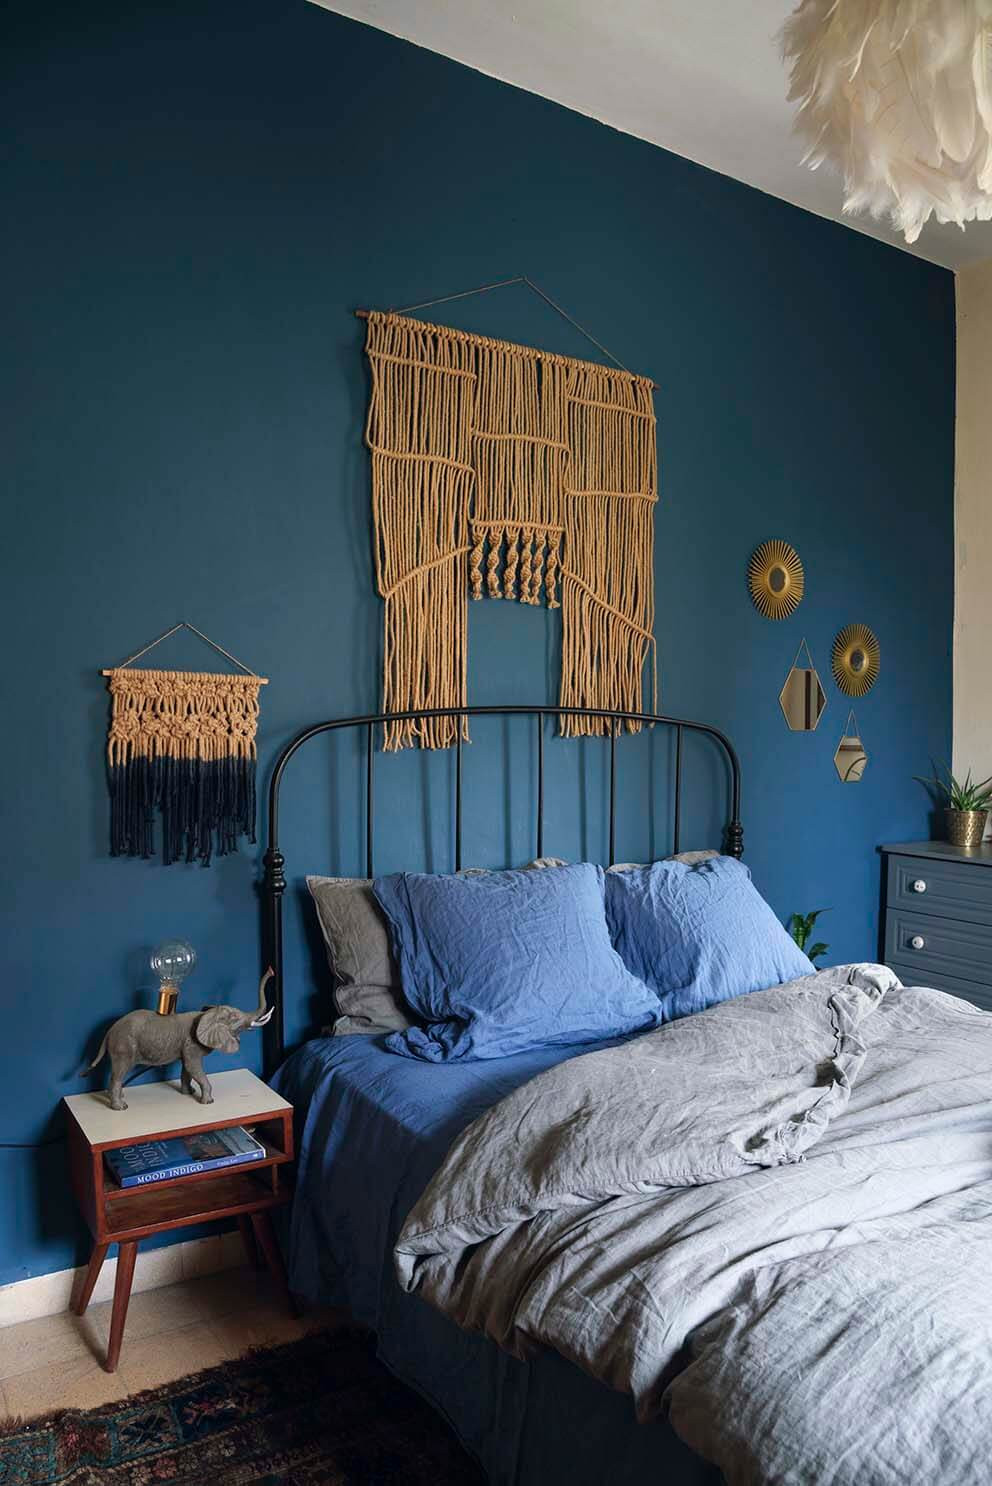 Bedroom Blue Walls
 This Is How To Decorate With Blue Walls